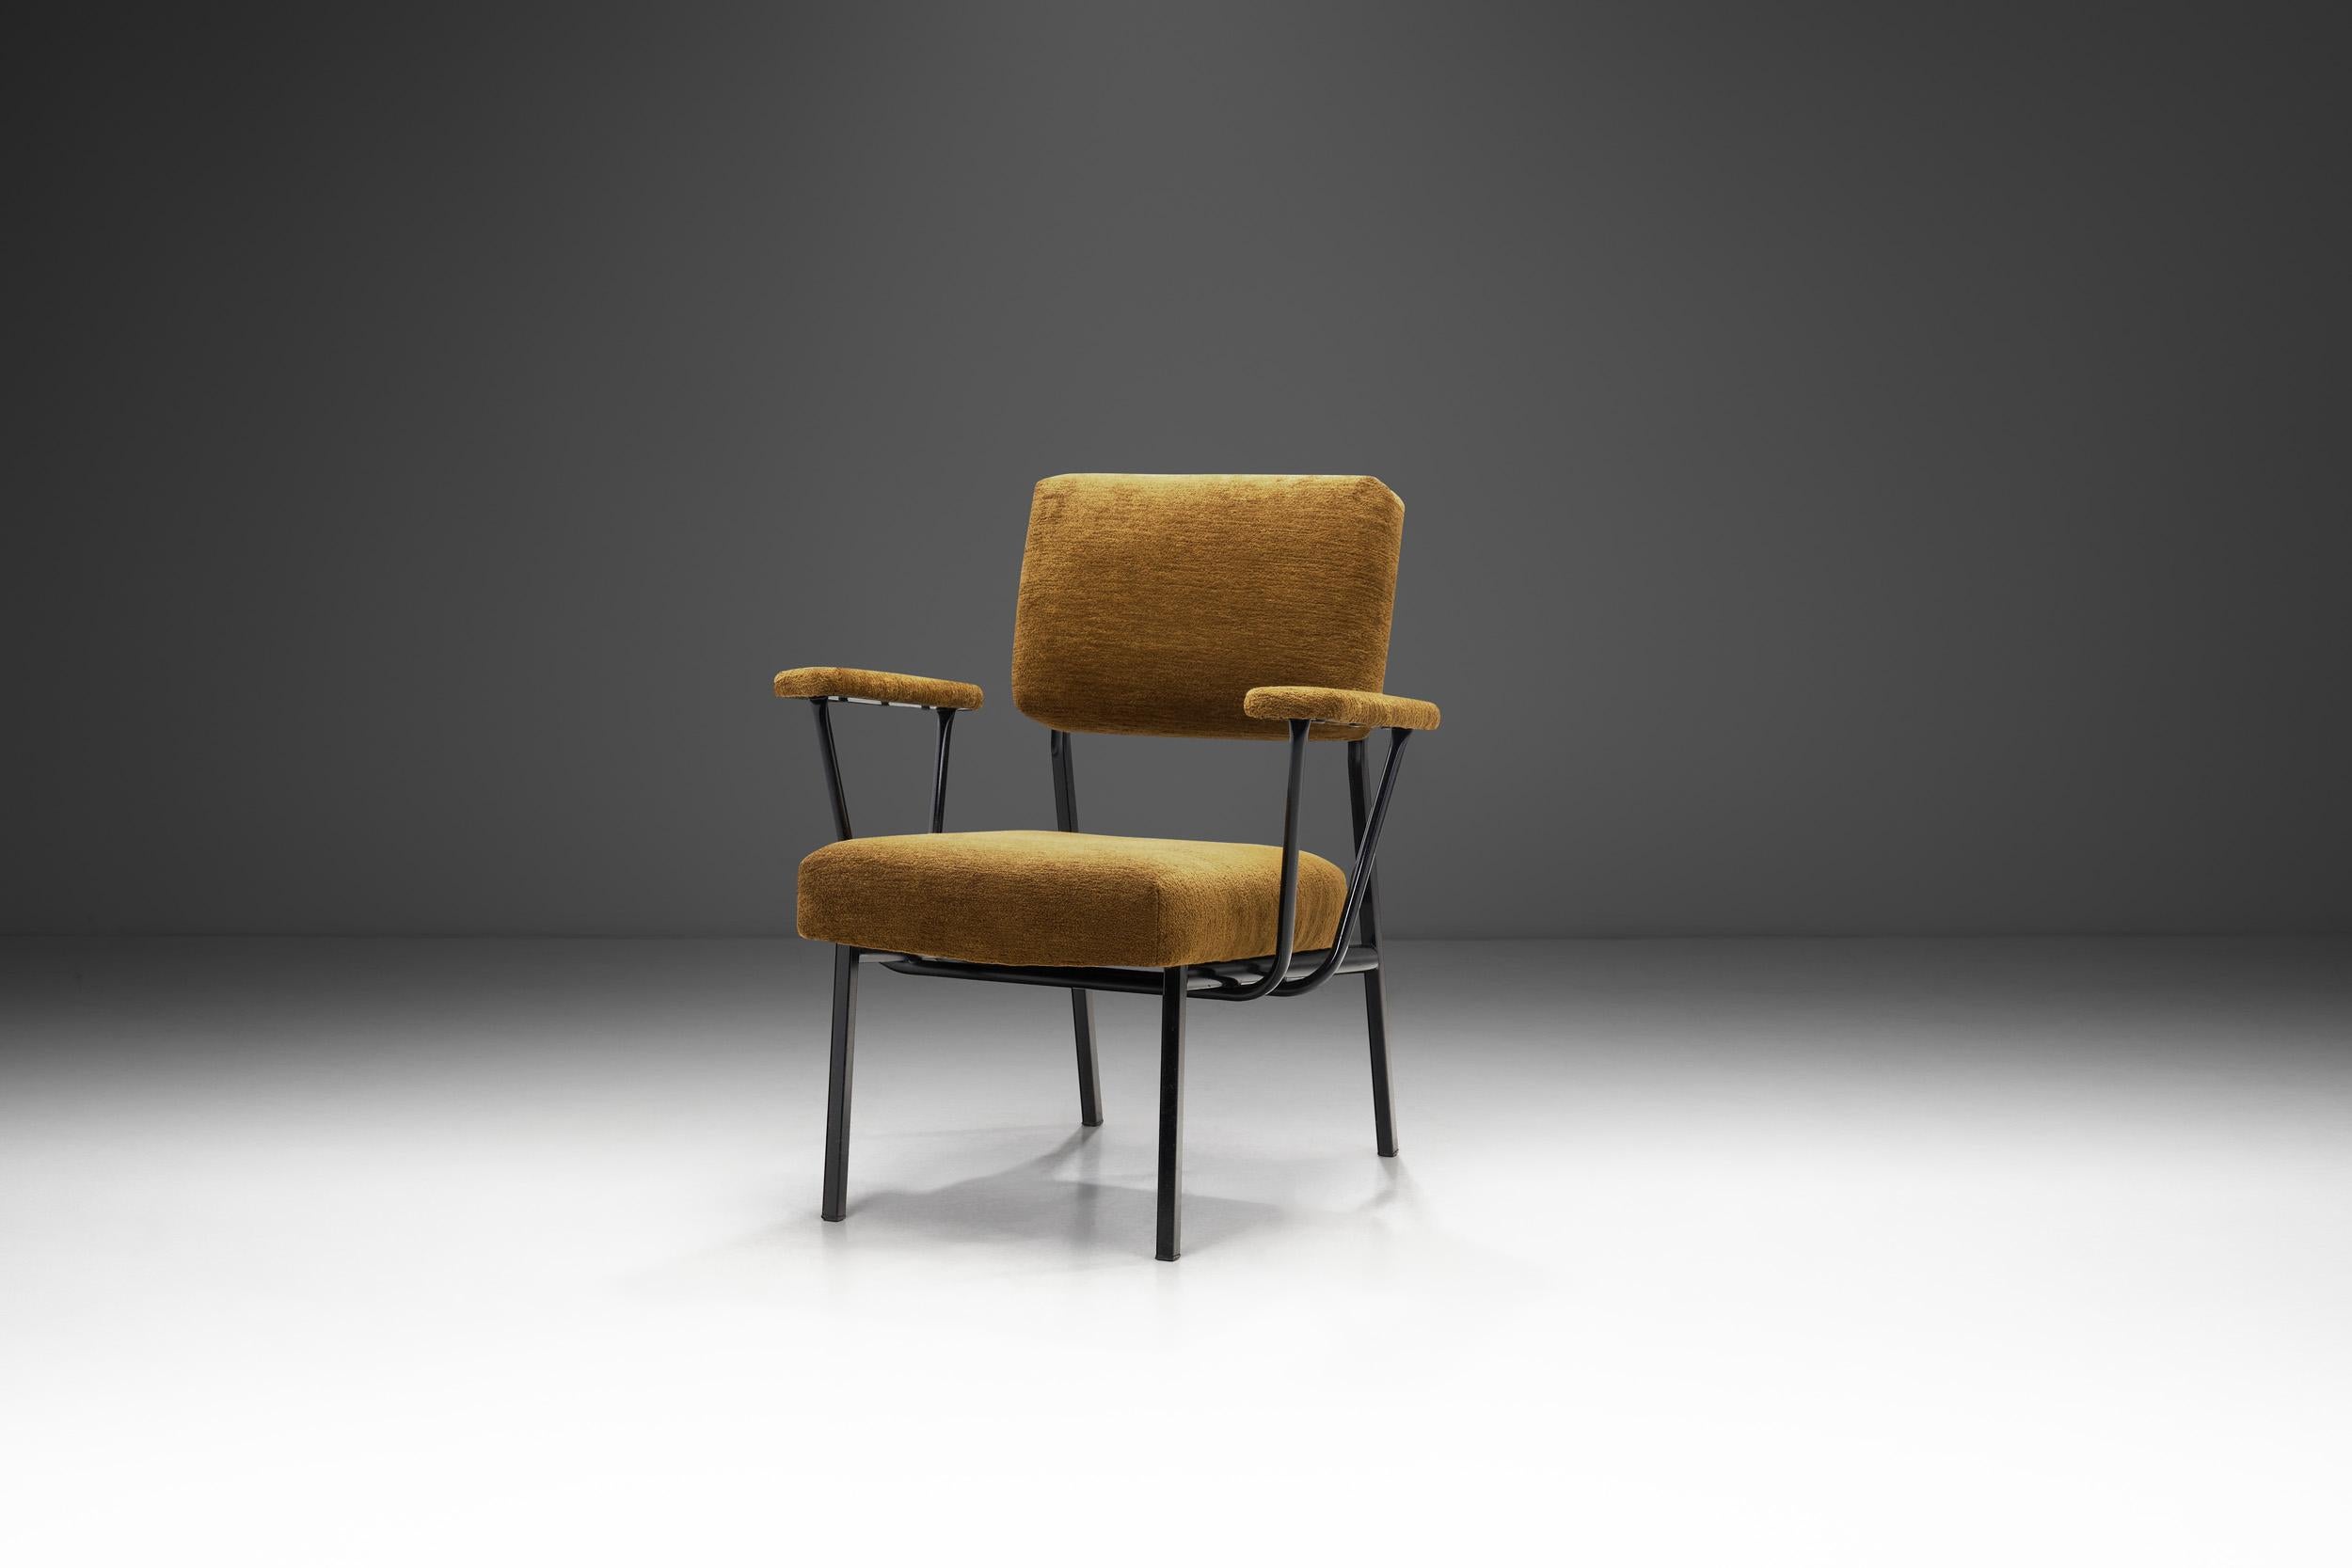 The post-war period in much of Europe saw a wide array of inventive and creative contributions to the history of design. Modernist furniture became known for its sober character and undecorated elegance, with comfort and functionality often being